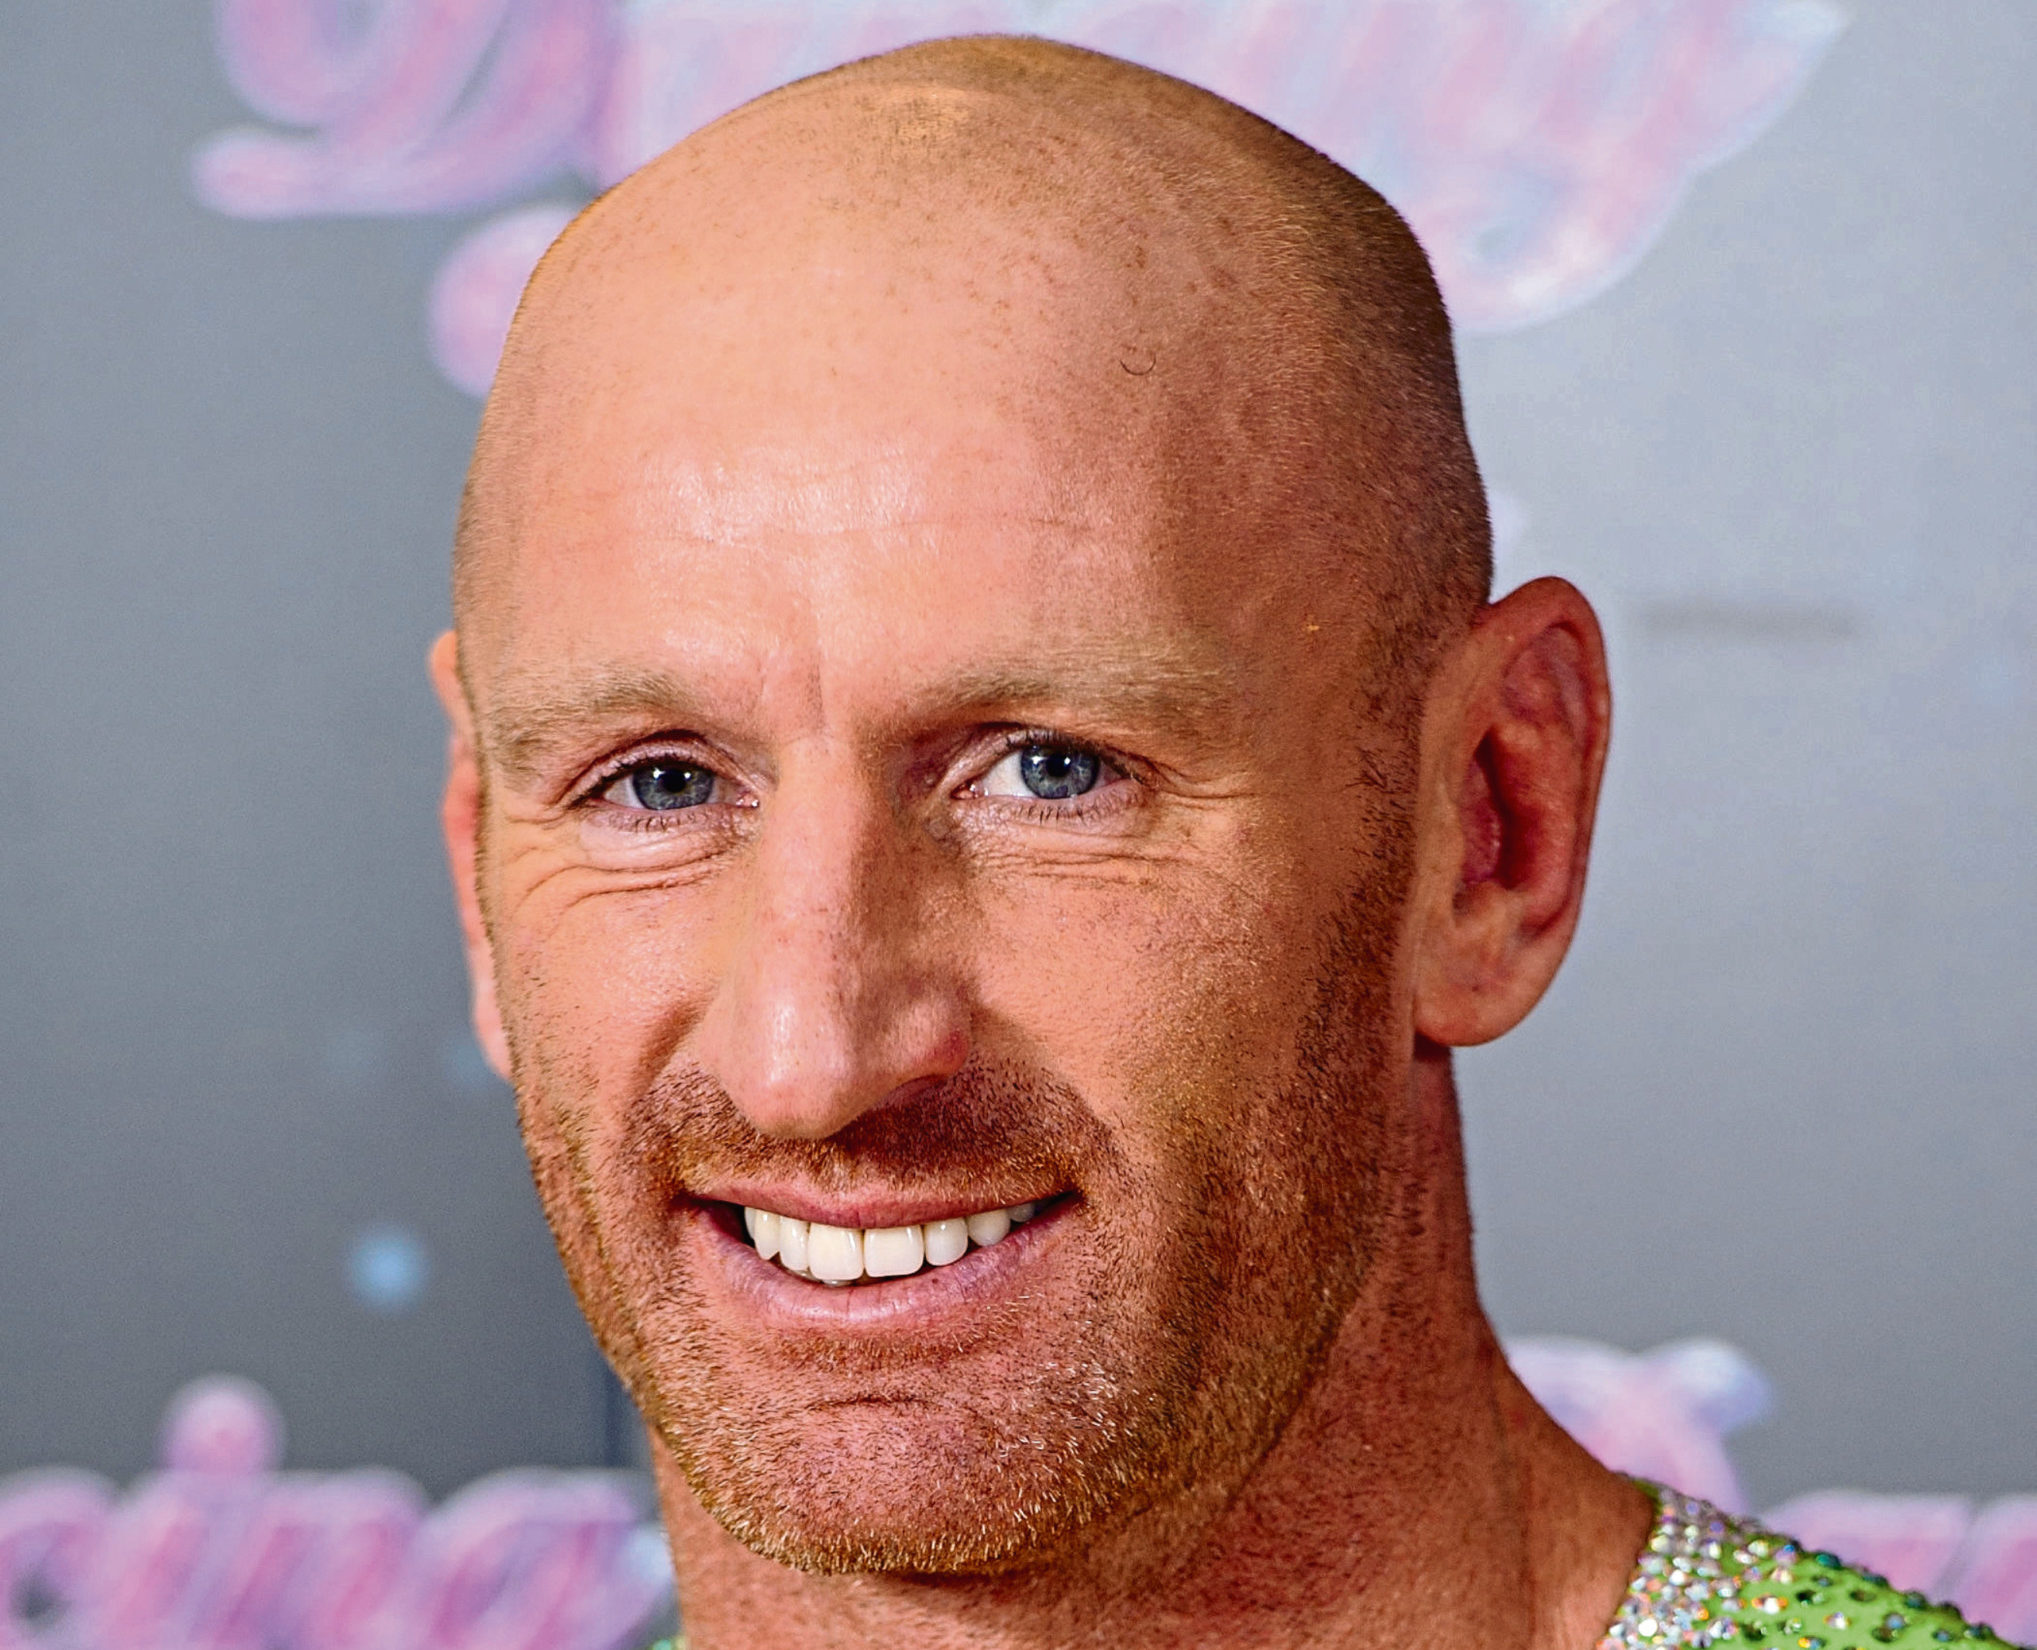 Former Wales rugby captain Gareth Thomas who is taking part in a 140-mile Ironman triathlon, a day after revealing he is HIV positive.